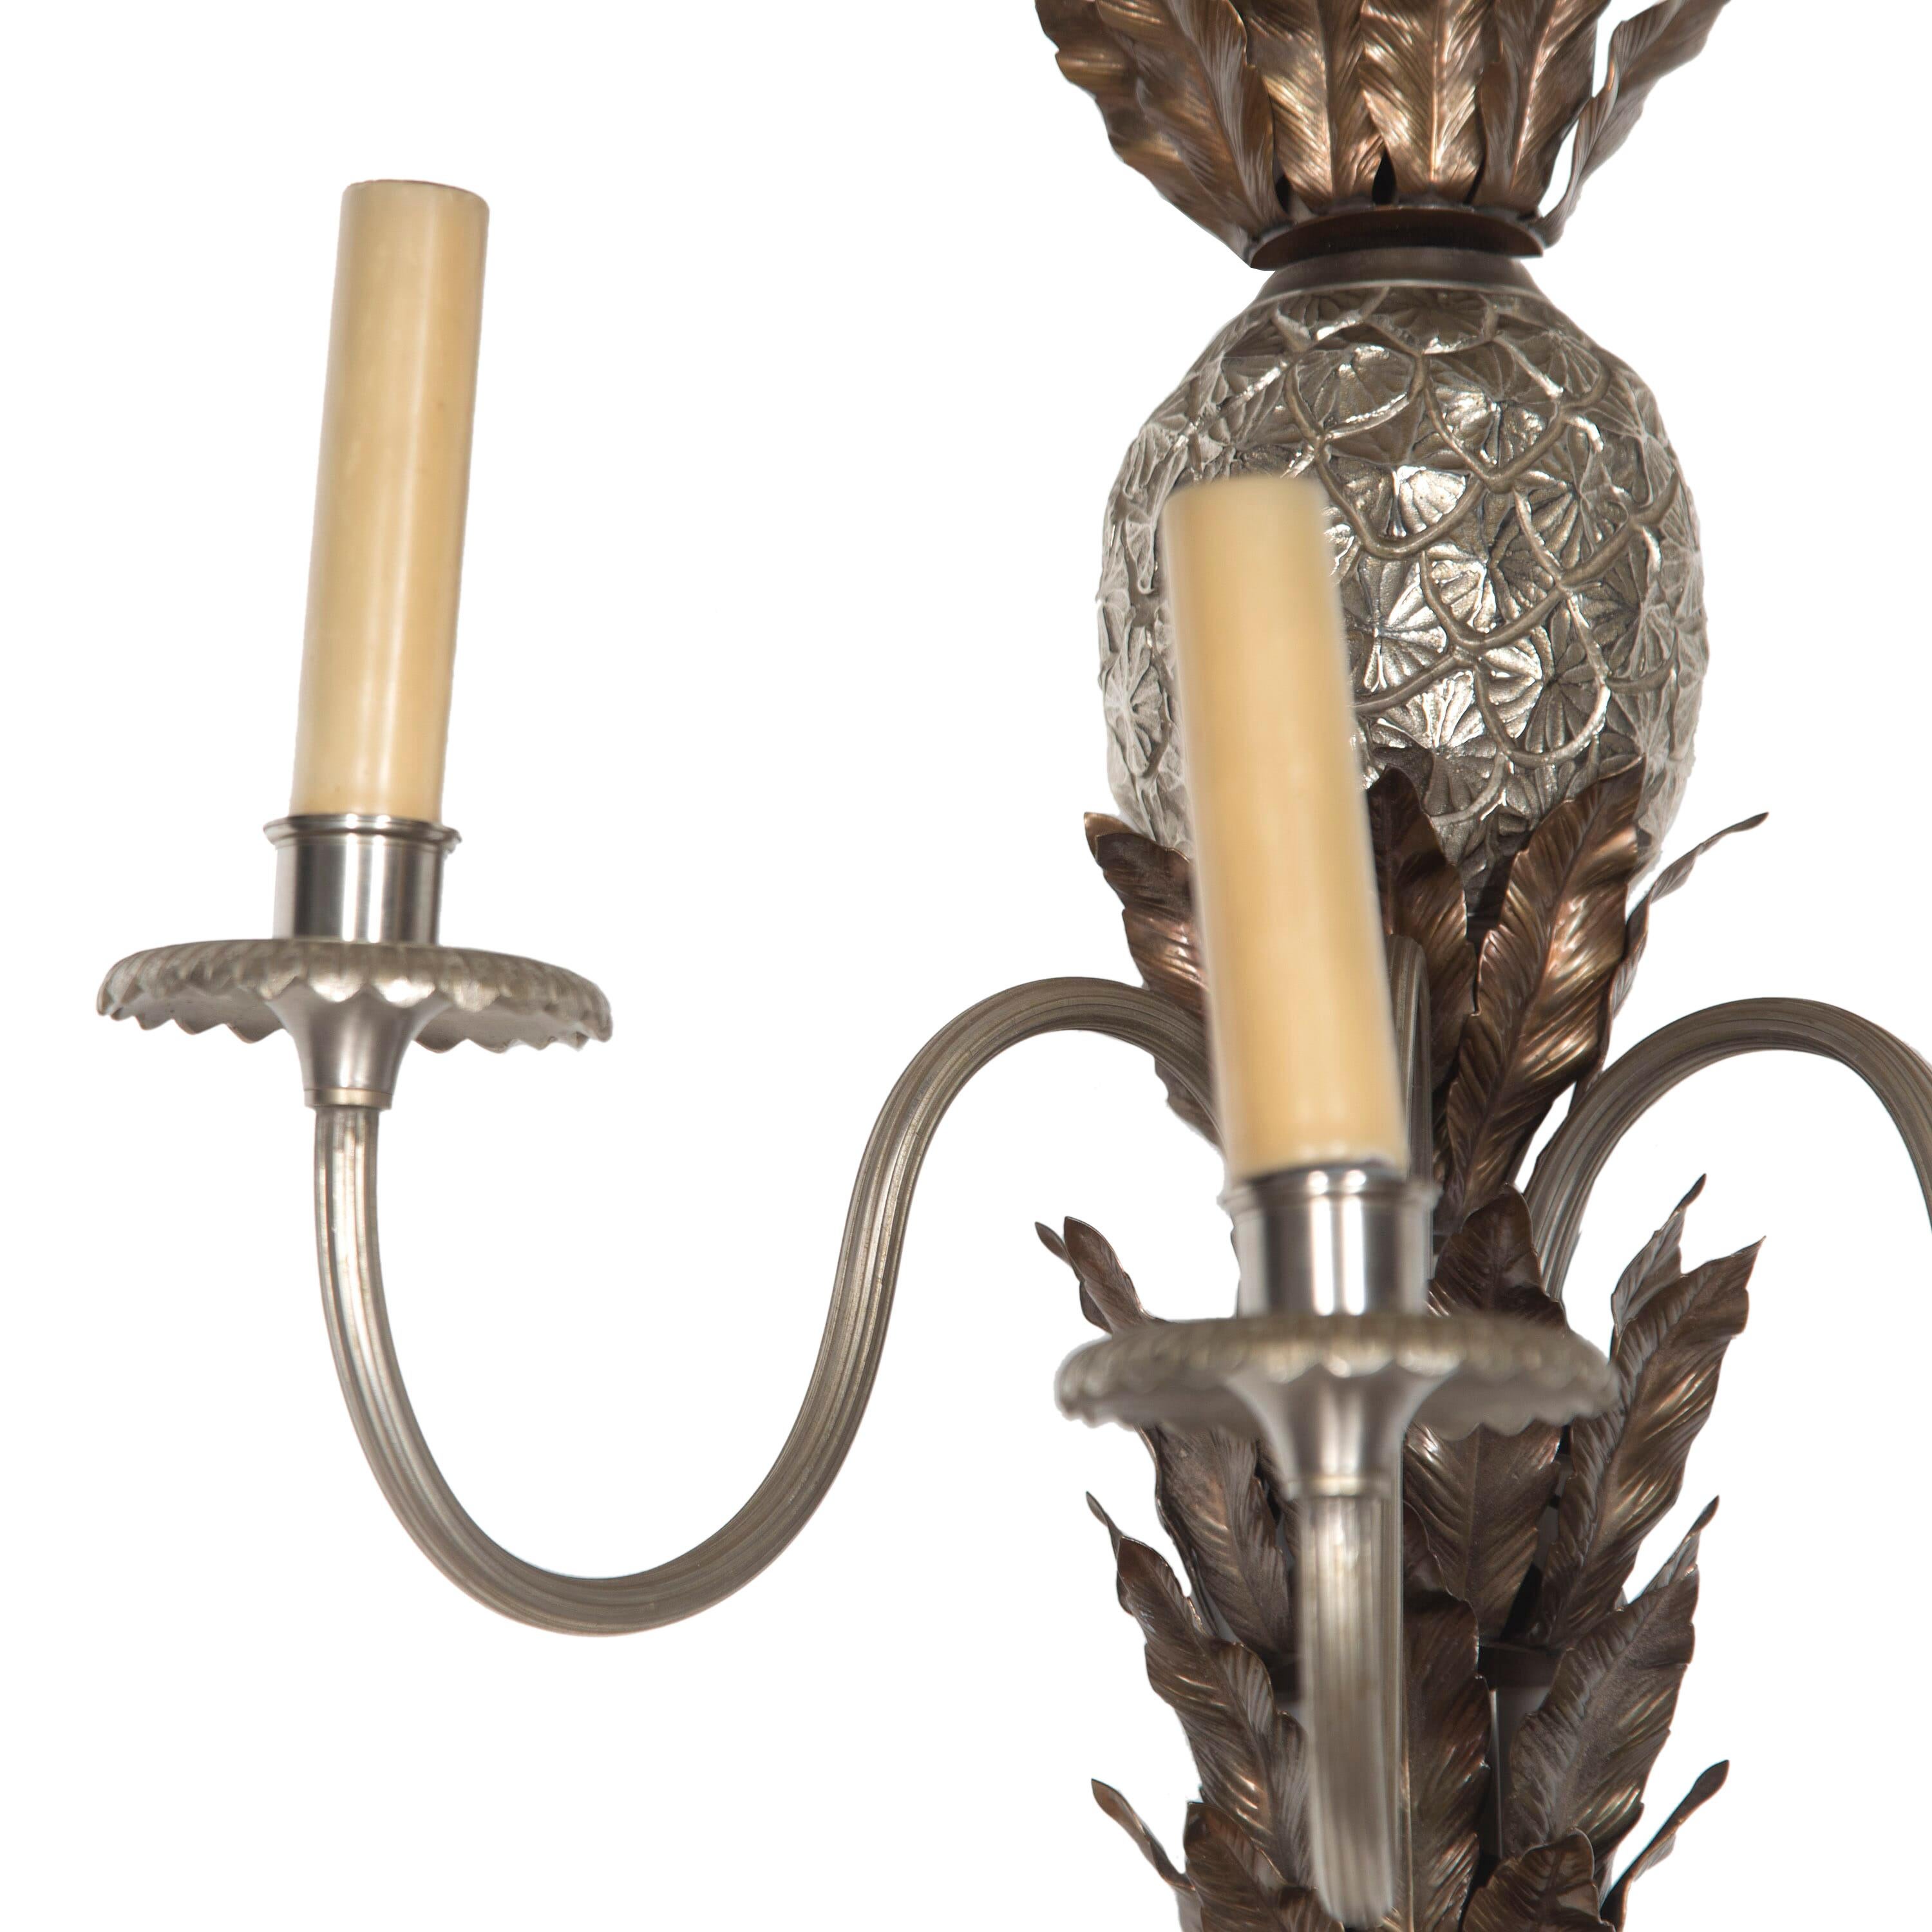 A pair of early 20th century pineapple wall lights. The quality casting gives decorative definition to the pineapple and leaves. This piece has been rewired and PAT tested to UK standard.